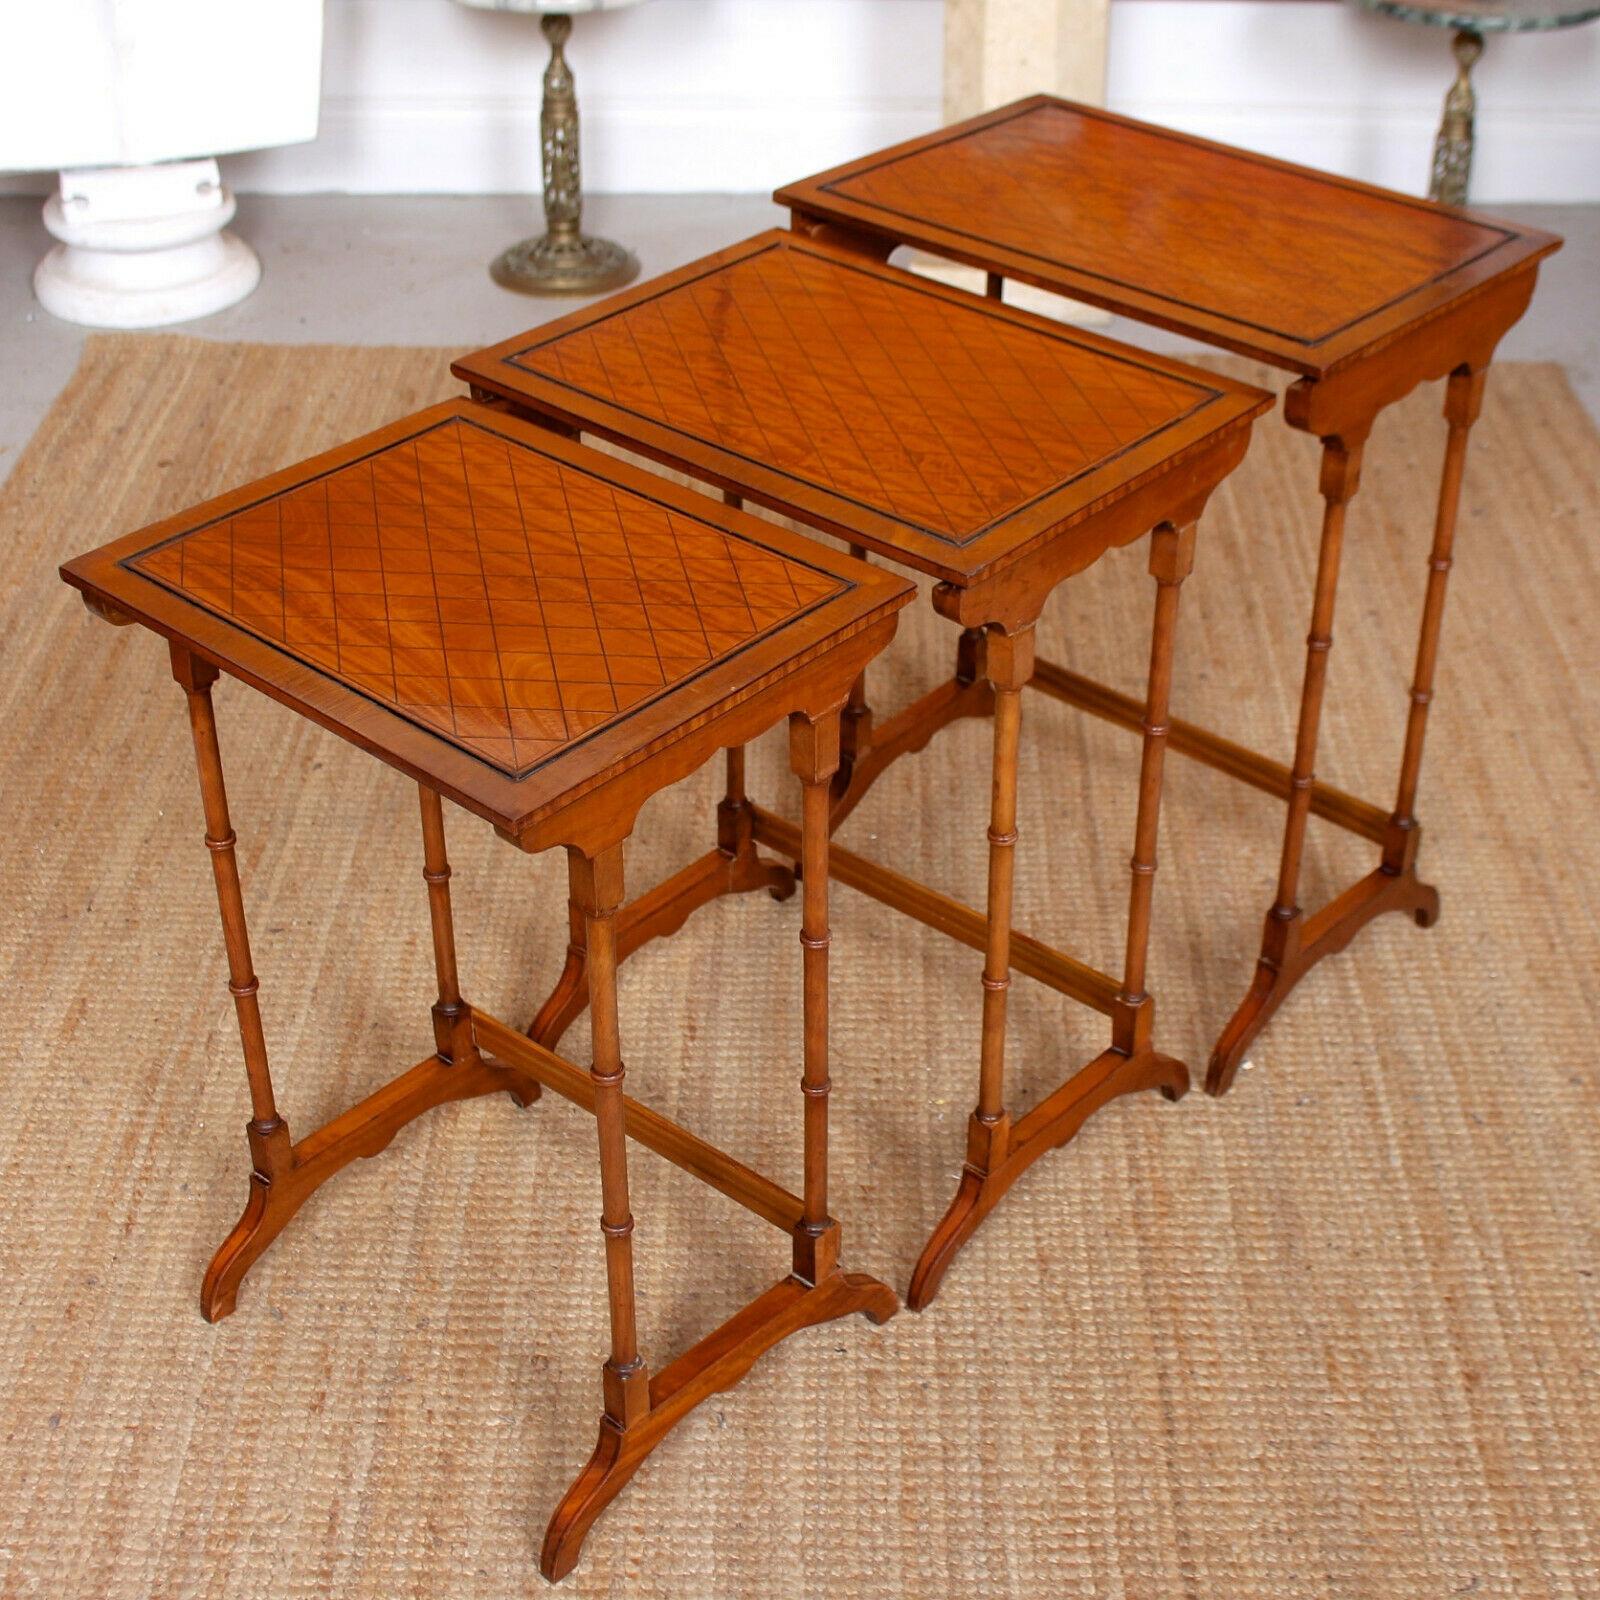 An impressive fine quality nest of three tables in the Georgian manner.
The cross-banded trellis tops raised on slender turned legs and carved feet united by stretchers.